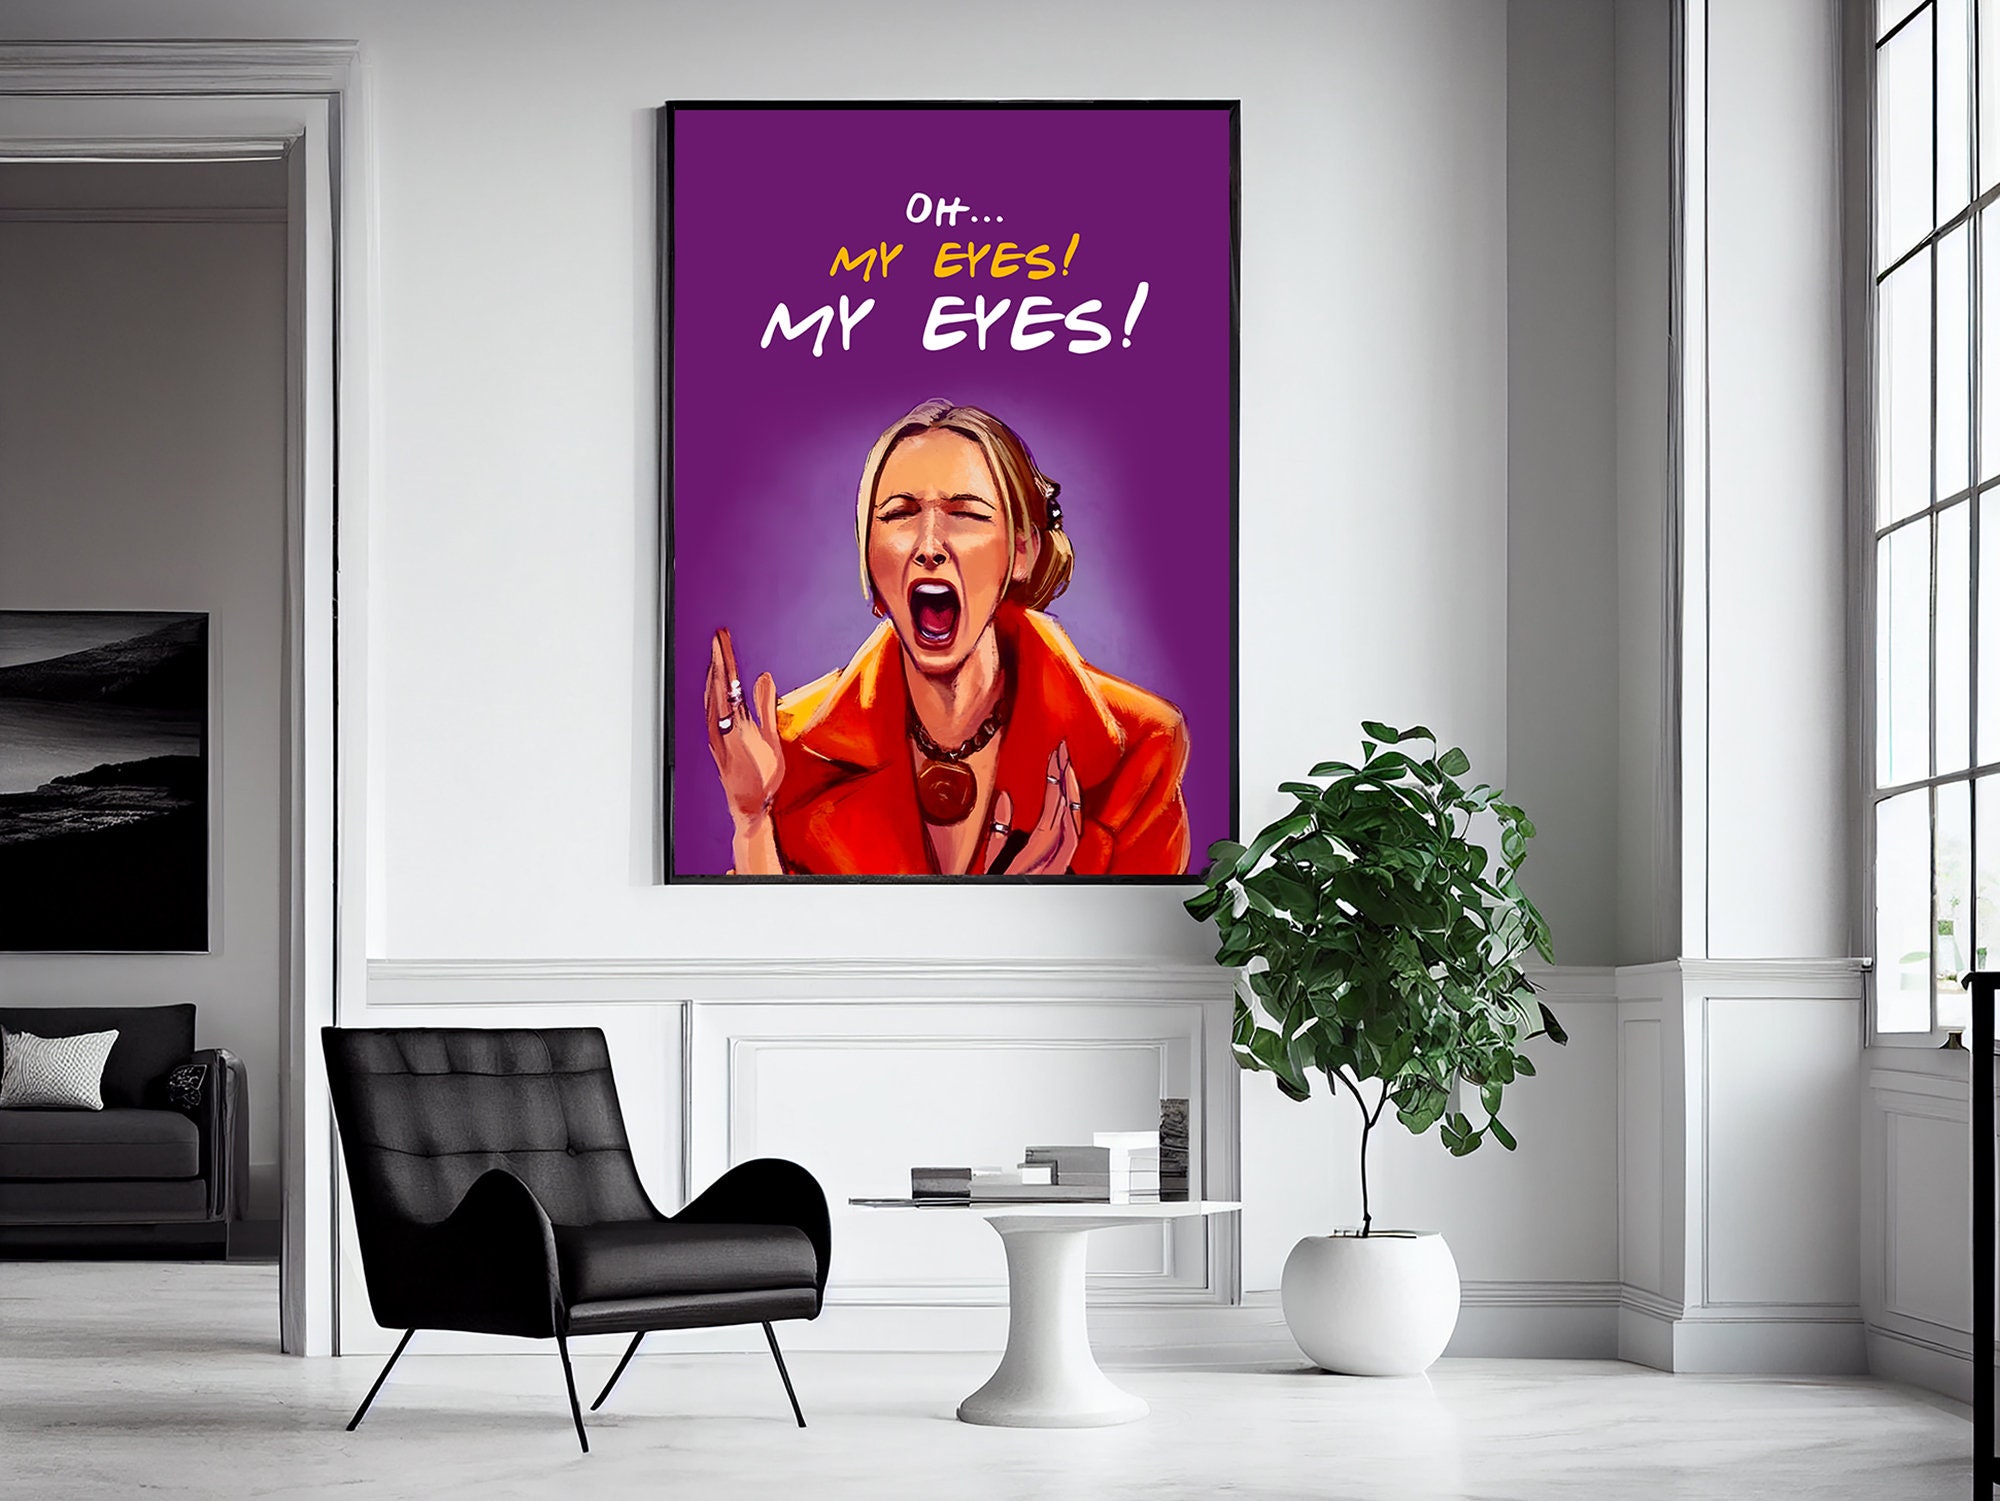 Discover Friends poster, My eyes Phoebe poster, Phoebe quote poster, My eyes poster, tv series quotes, movie quotes,  No Frame